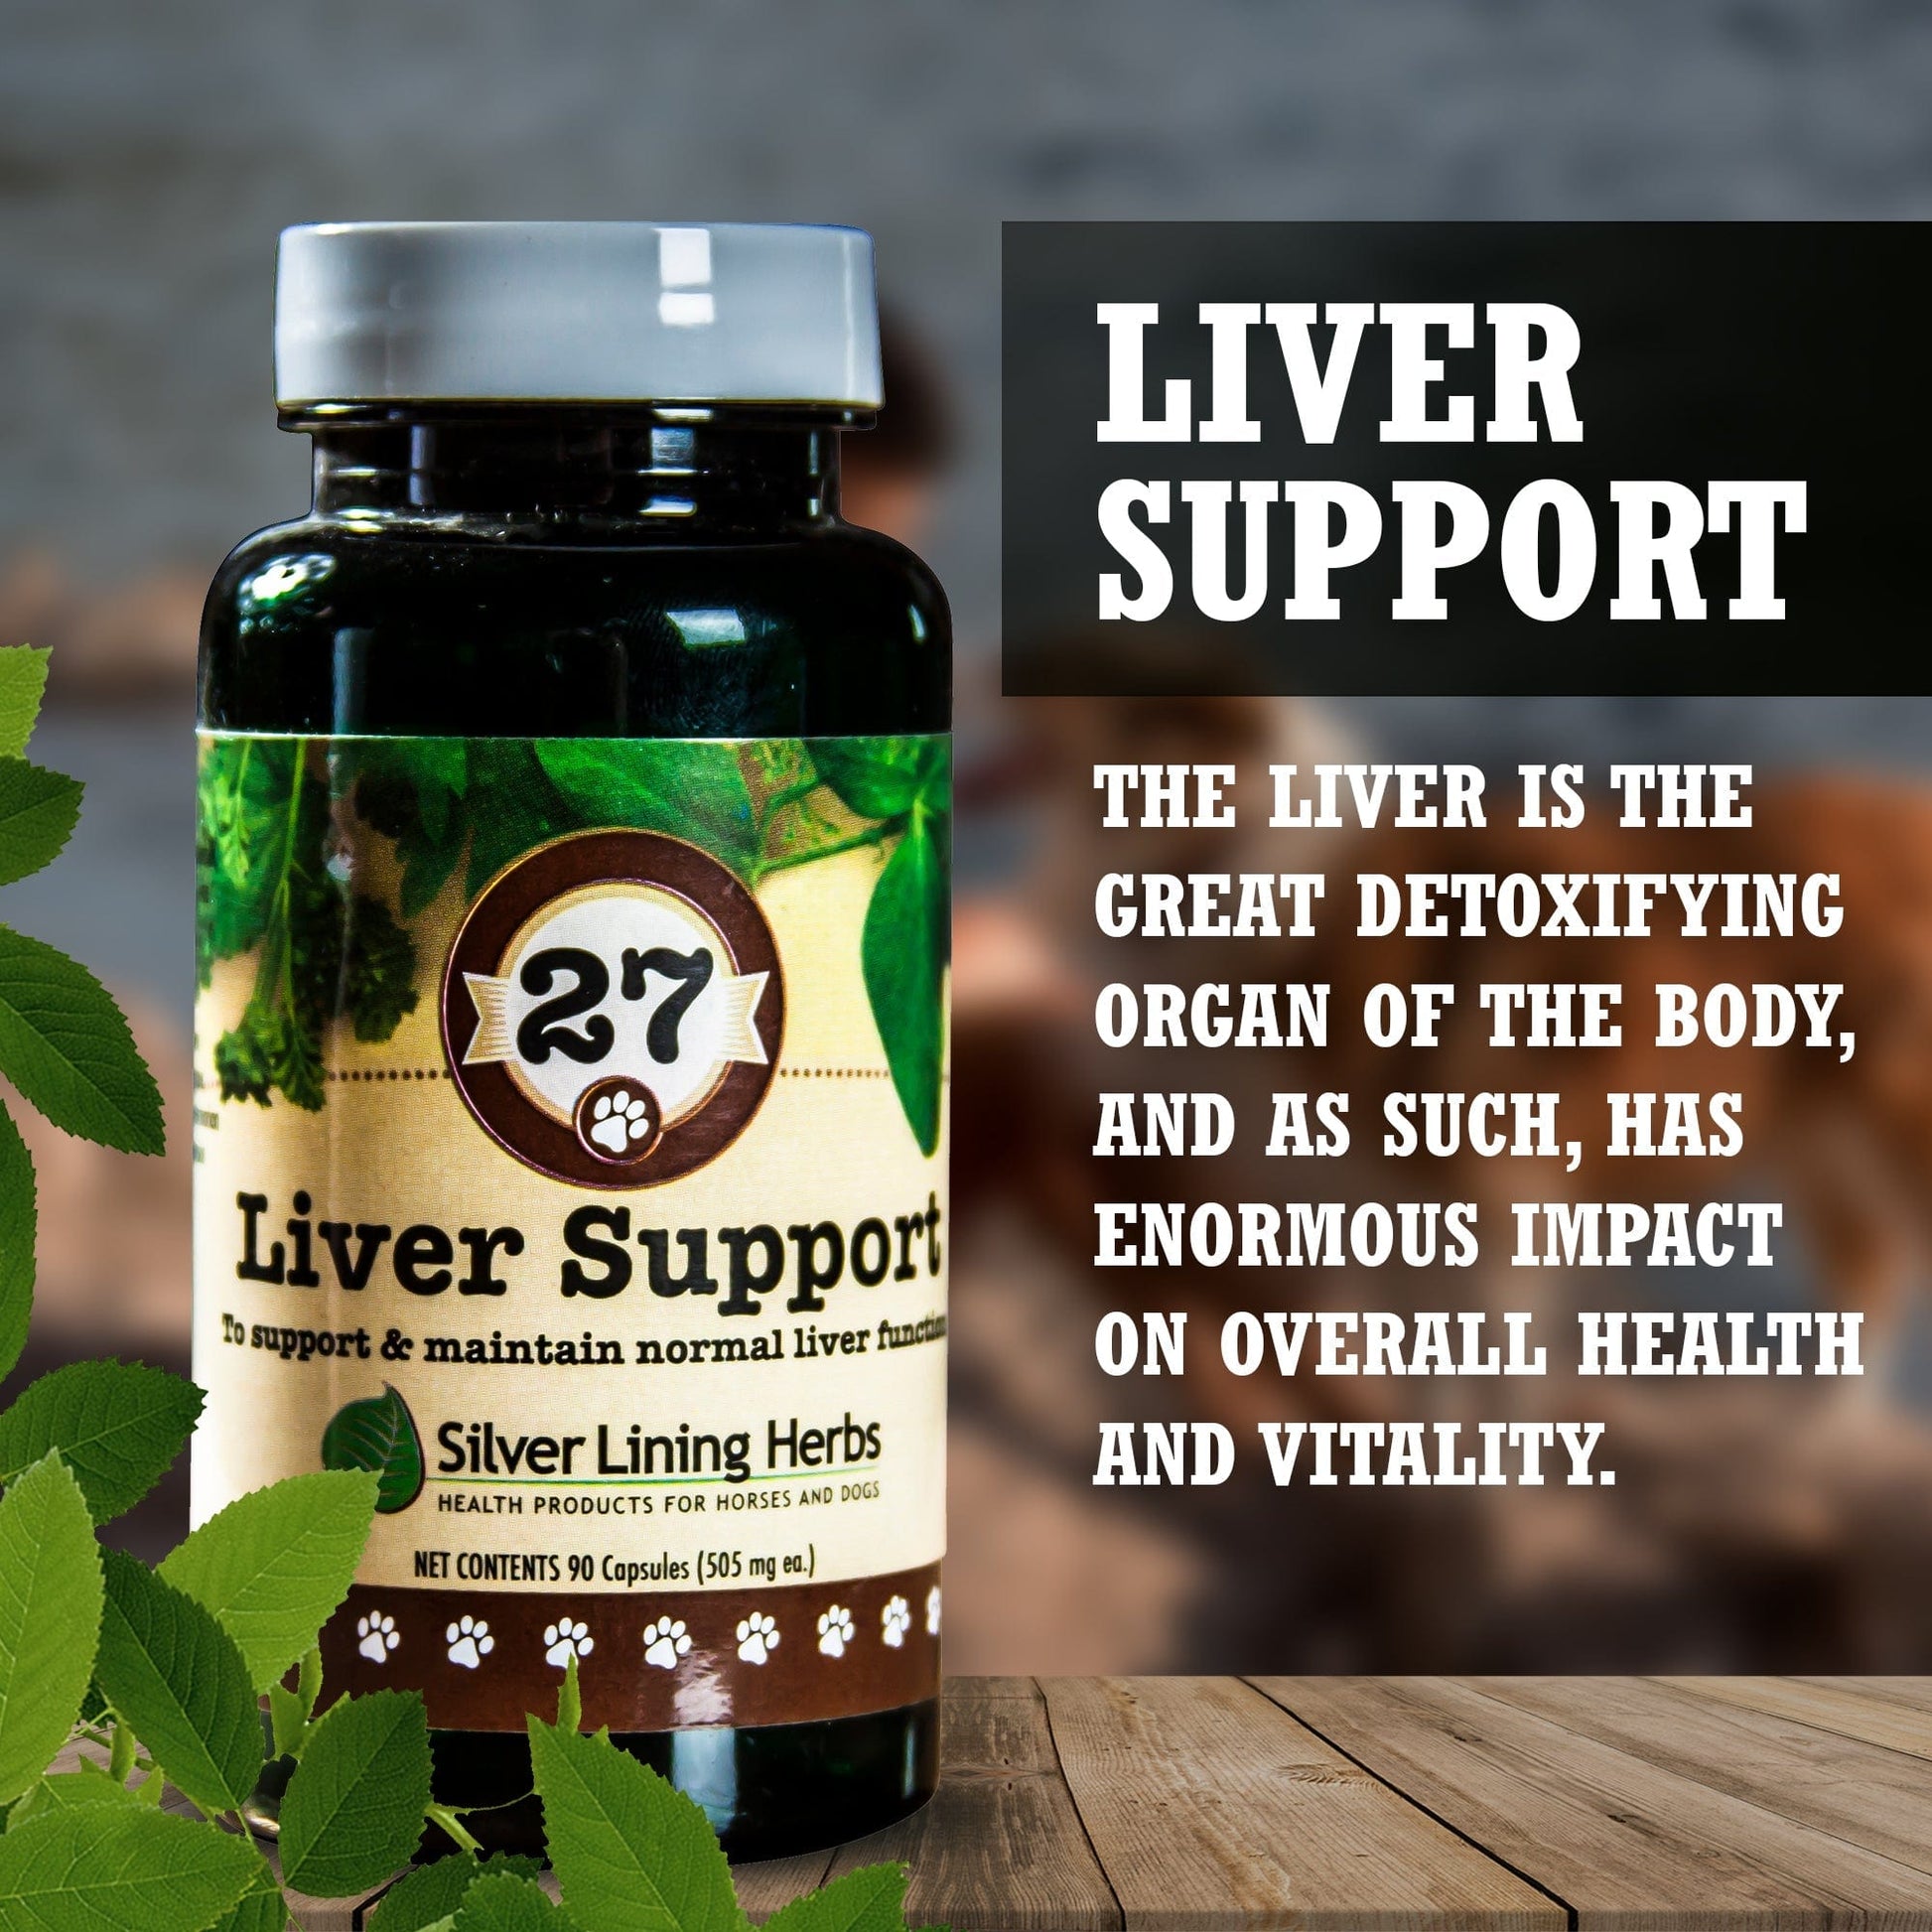 A bottle of #27 Liver Support for Dogs, with an explanation of the liver’s importance for health